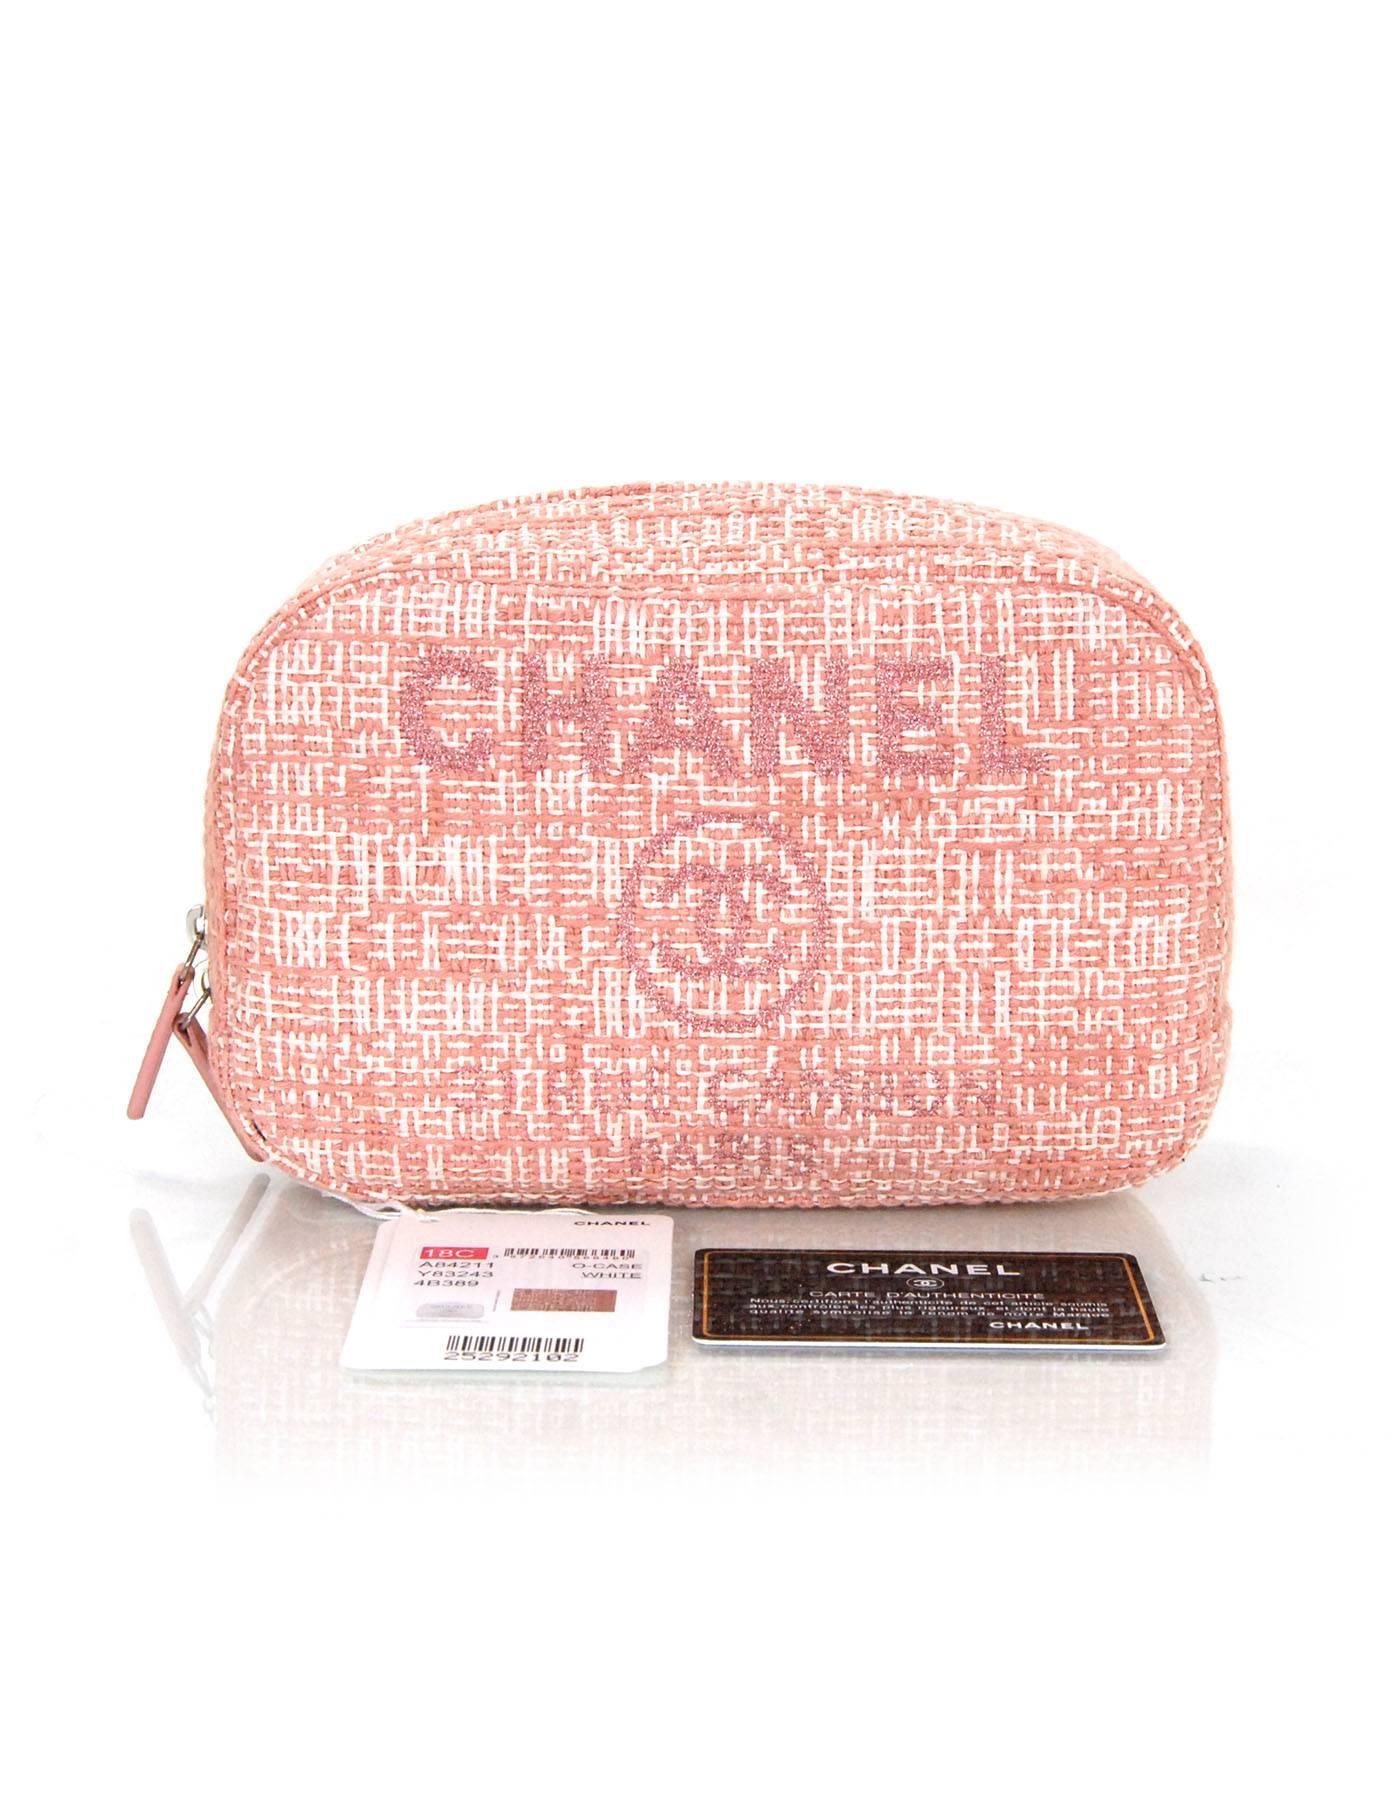 Chanel 2018 Pink Cruise Deauville Zip O-Case Travel Pouch Bag with Tag & Card 1